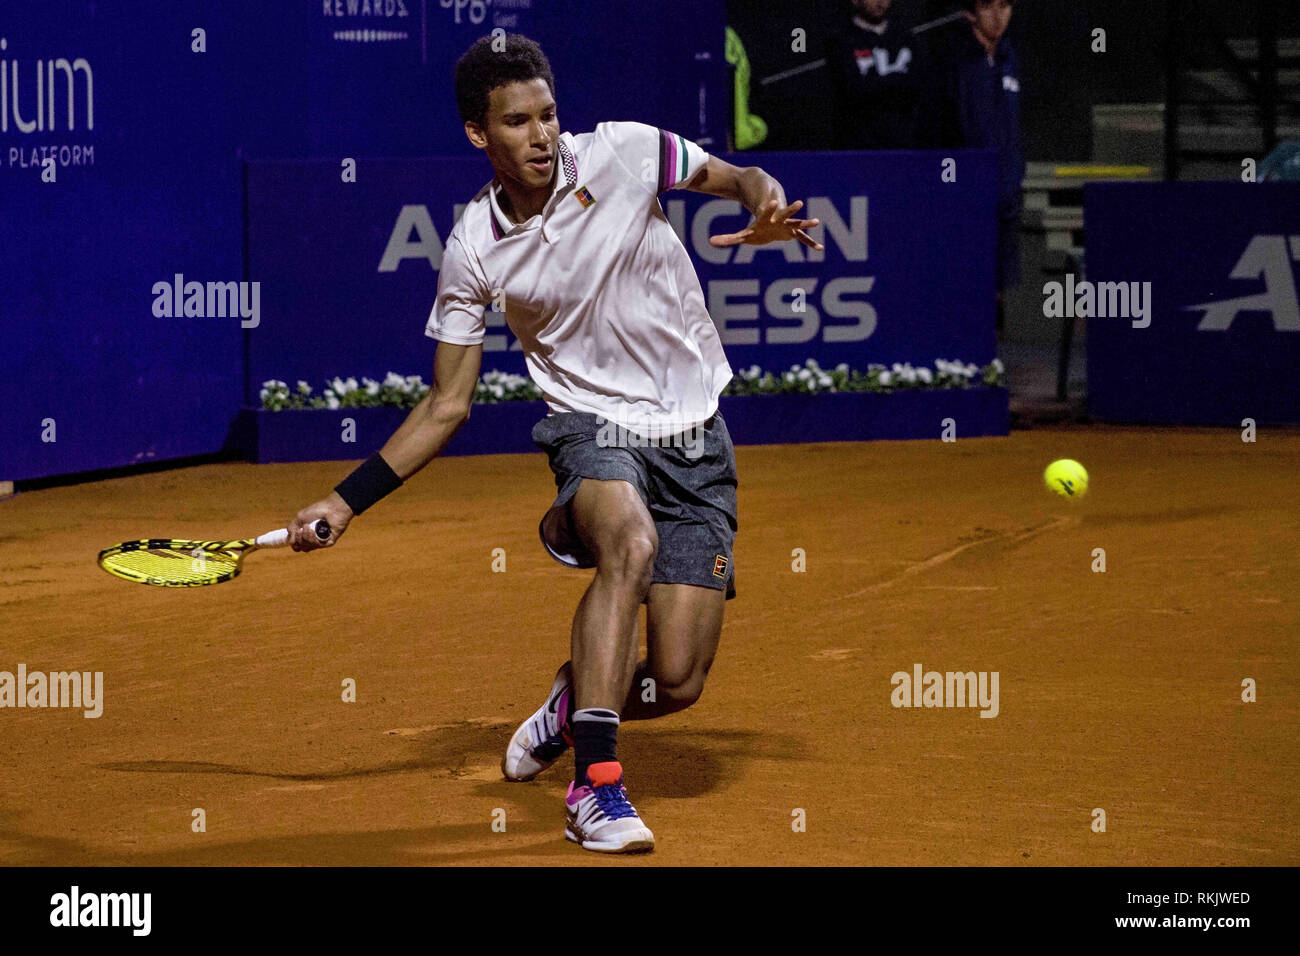 Buenos Aires, Federal Capital, Argentina. 11th Feb, 2019. The Chilean Christian Garin rallied and won the Canadian Felix Auger Aliassime in three sets to qualify for the second stage of the Argentina Open 2019 of the ATP 250. The final score was 3-6; 7-5; 6-3. Credit: Roberto Almeida Aveledo/ZUMA Wire/Alamy Live News Stock Photo